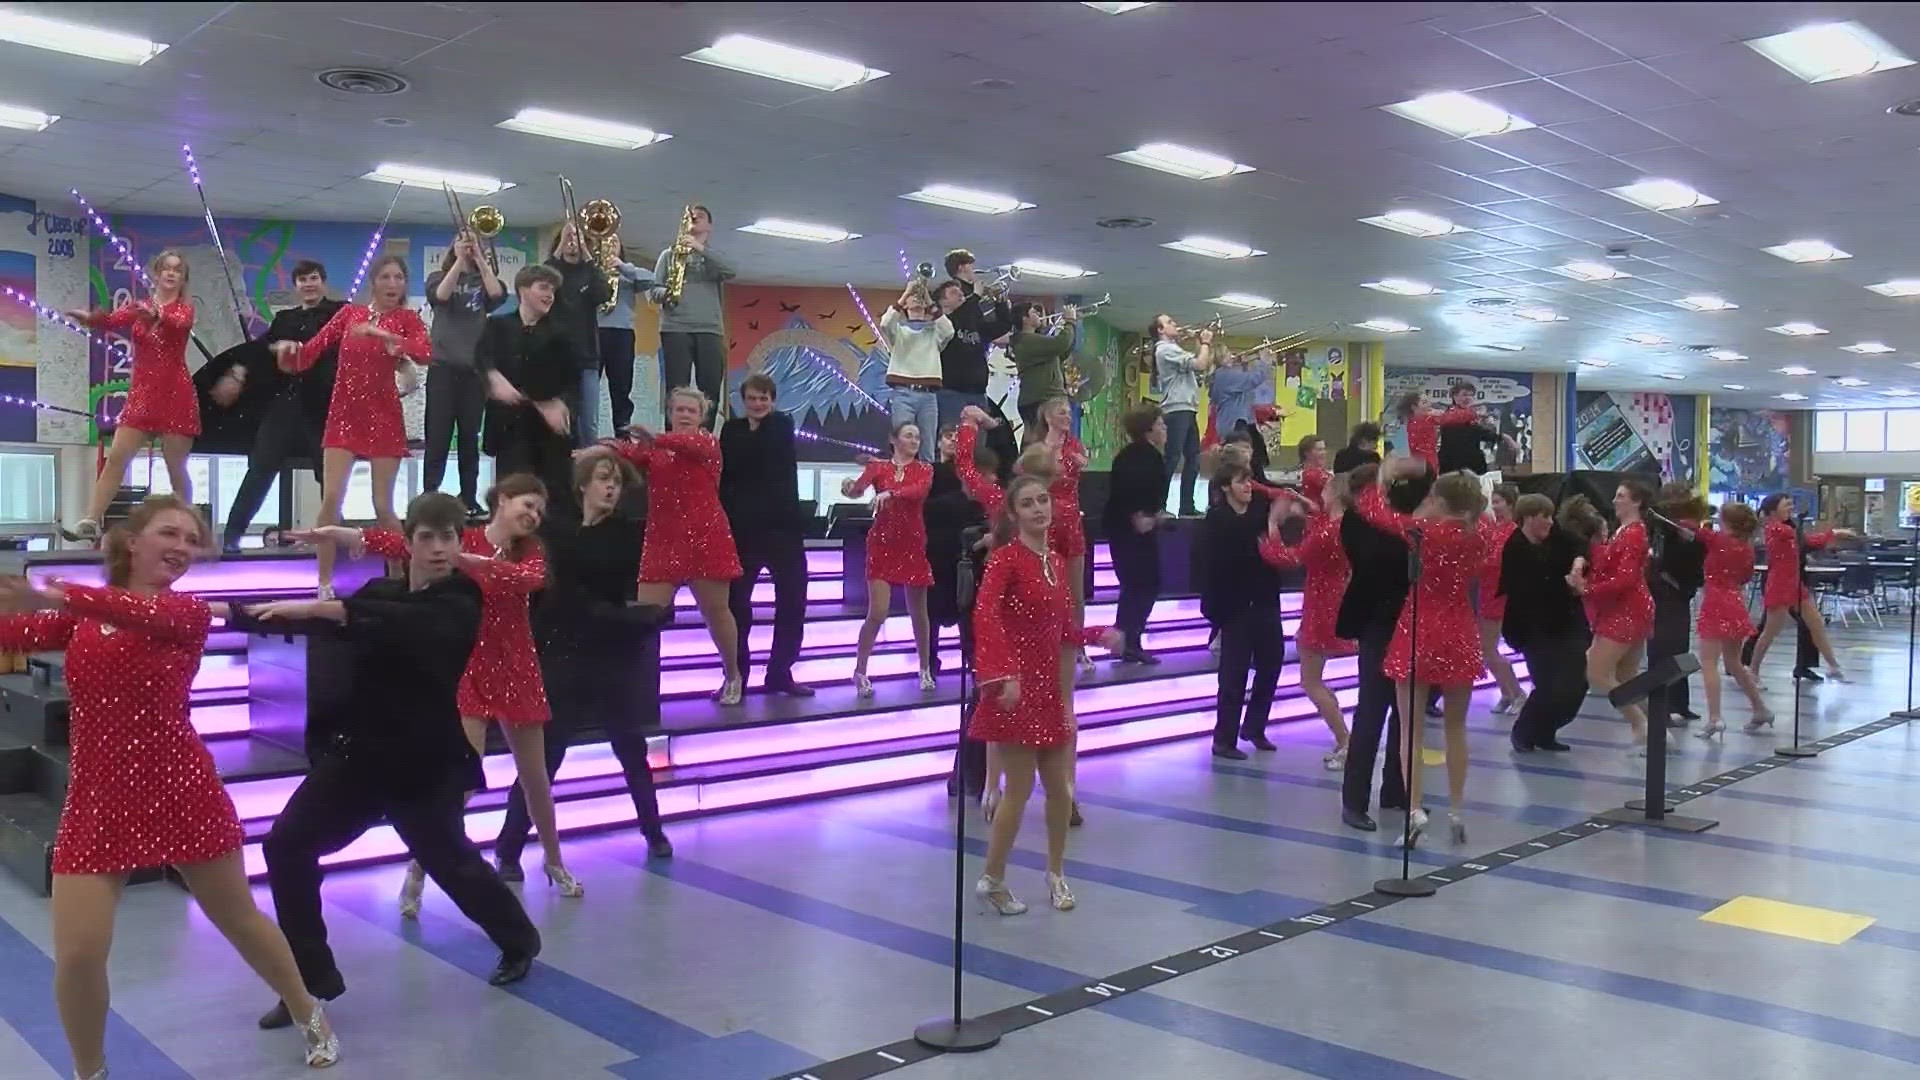 Findlay First Edition, a show choir from Findlay, is getting the chance of a lifetime. The group will perform at the Grand Ole Opry on Friday.